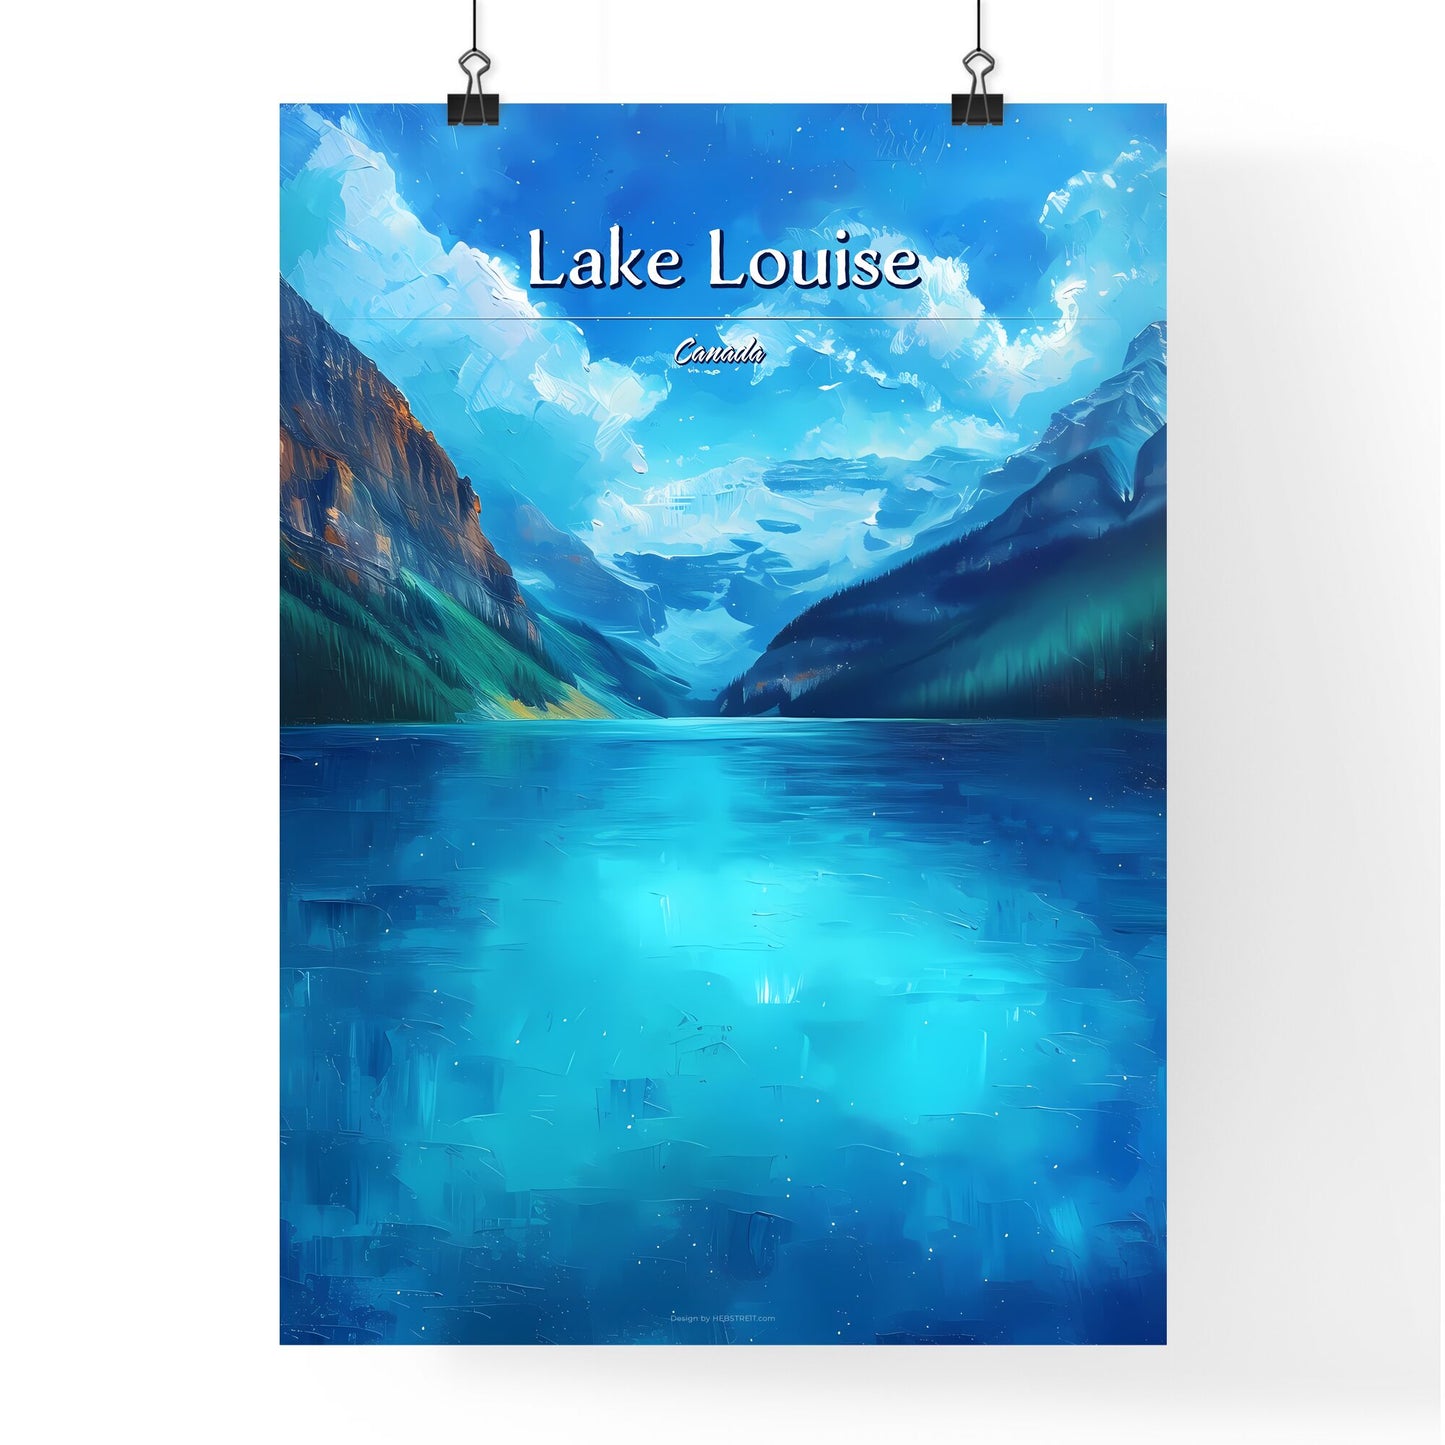 Lake Louise, Canada - Art print of a woman with blonde hair and red lipstick Default Title